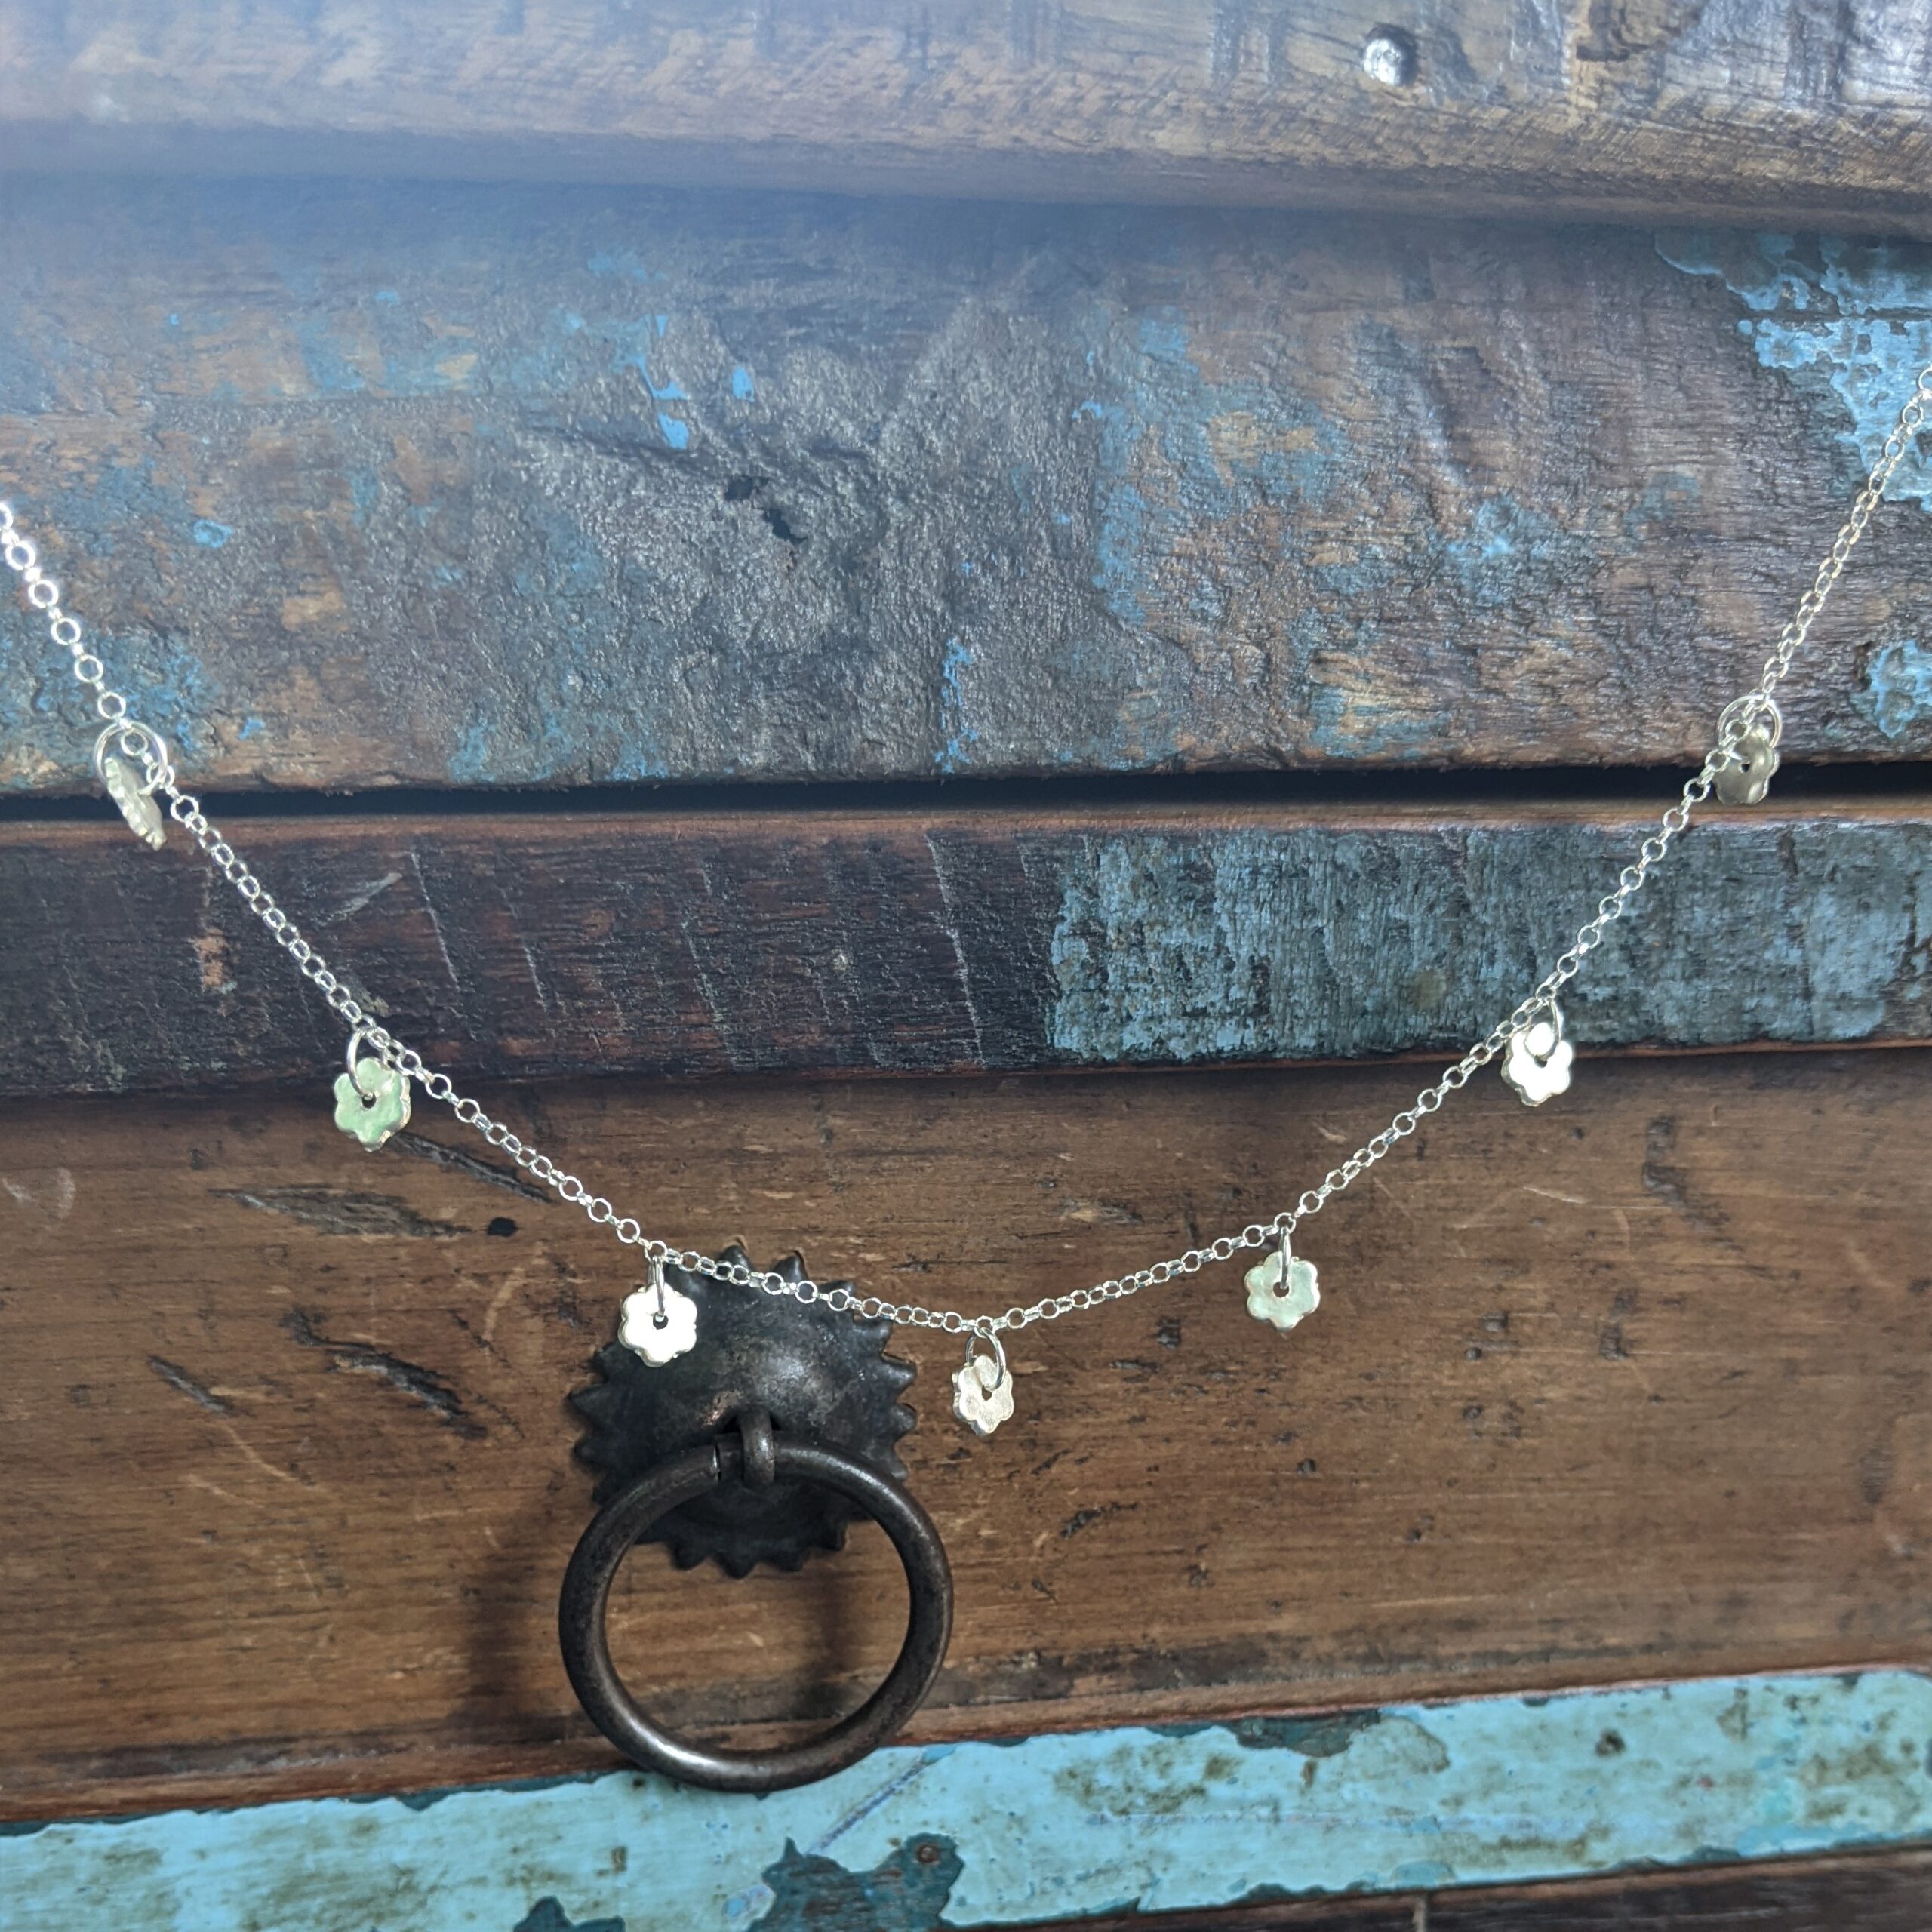 N106 Pamela Necklace. 7 tiny flower, fine silver charms suspended on a recycled sterling silver chain. Comes with extension chain to wear at different lengths.